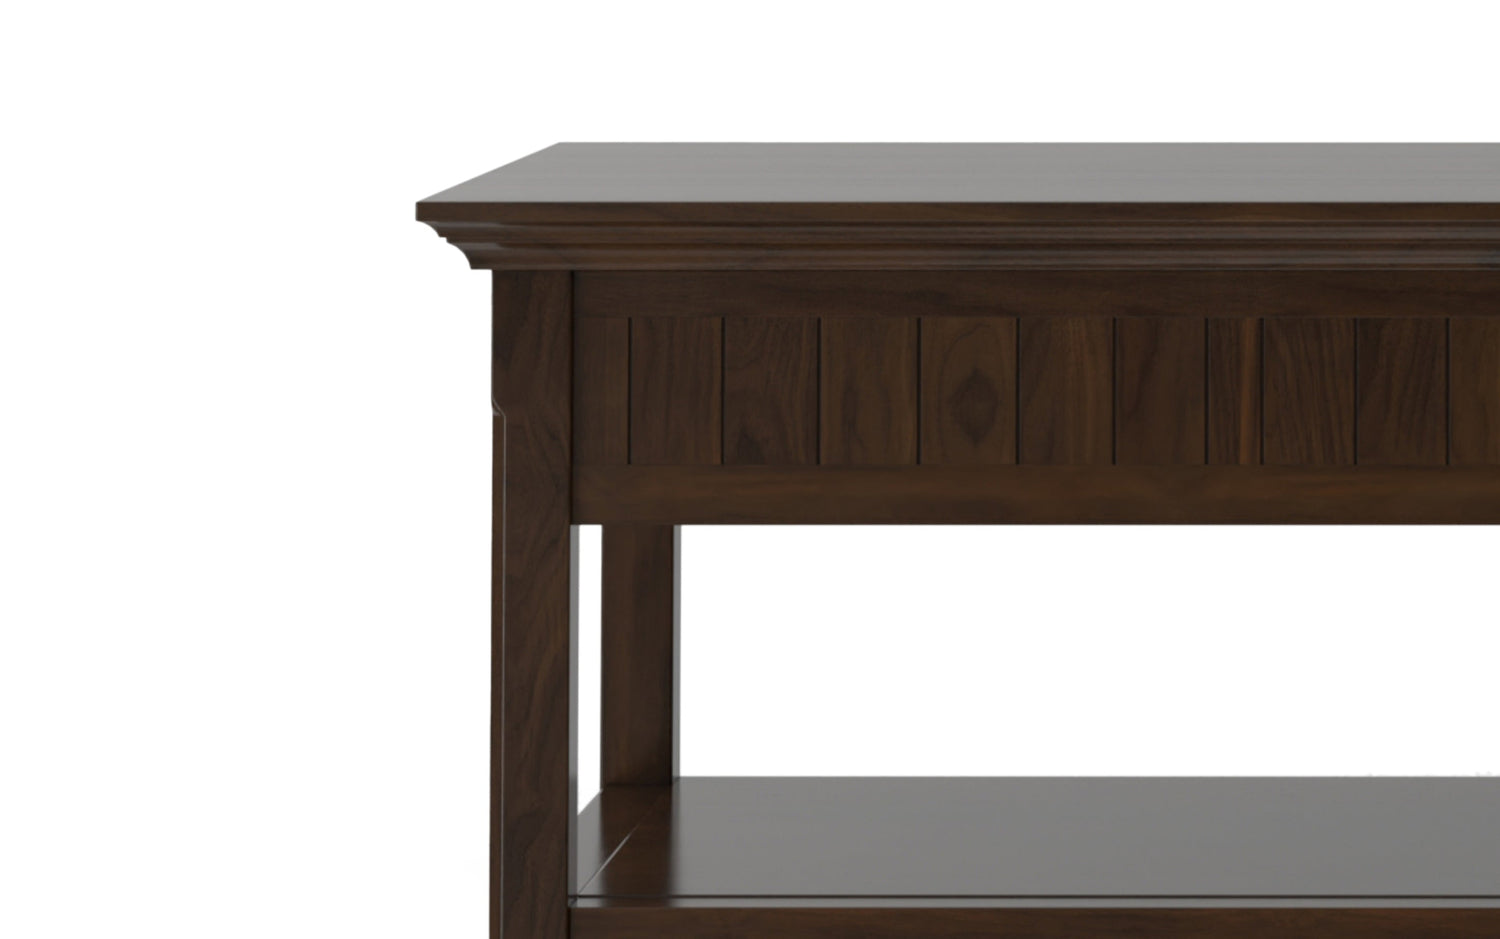 Acadian Lift Top Coffee Table